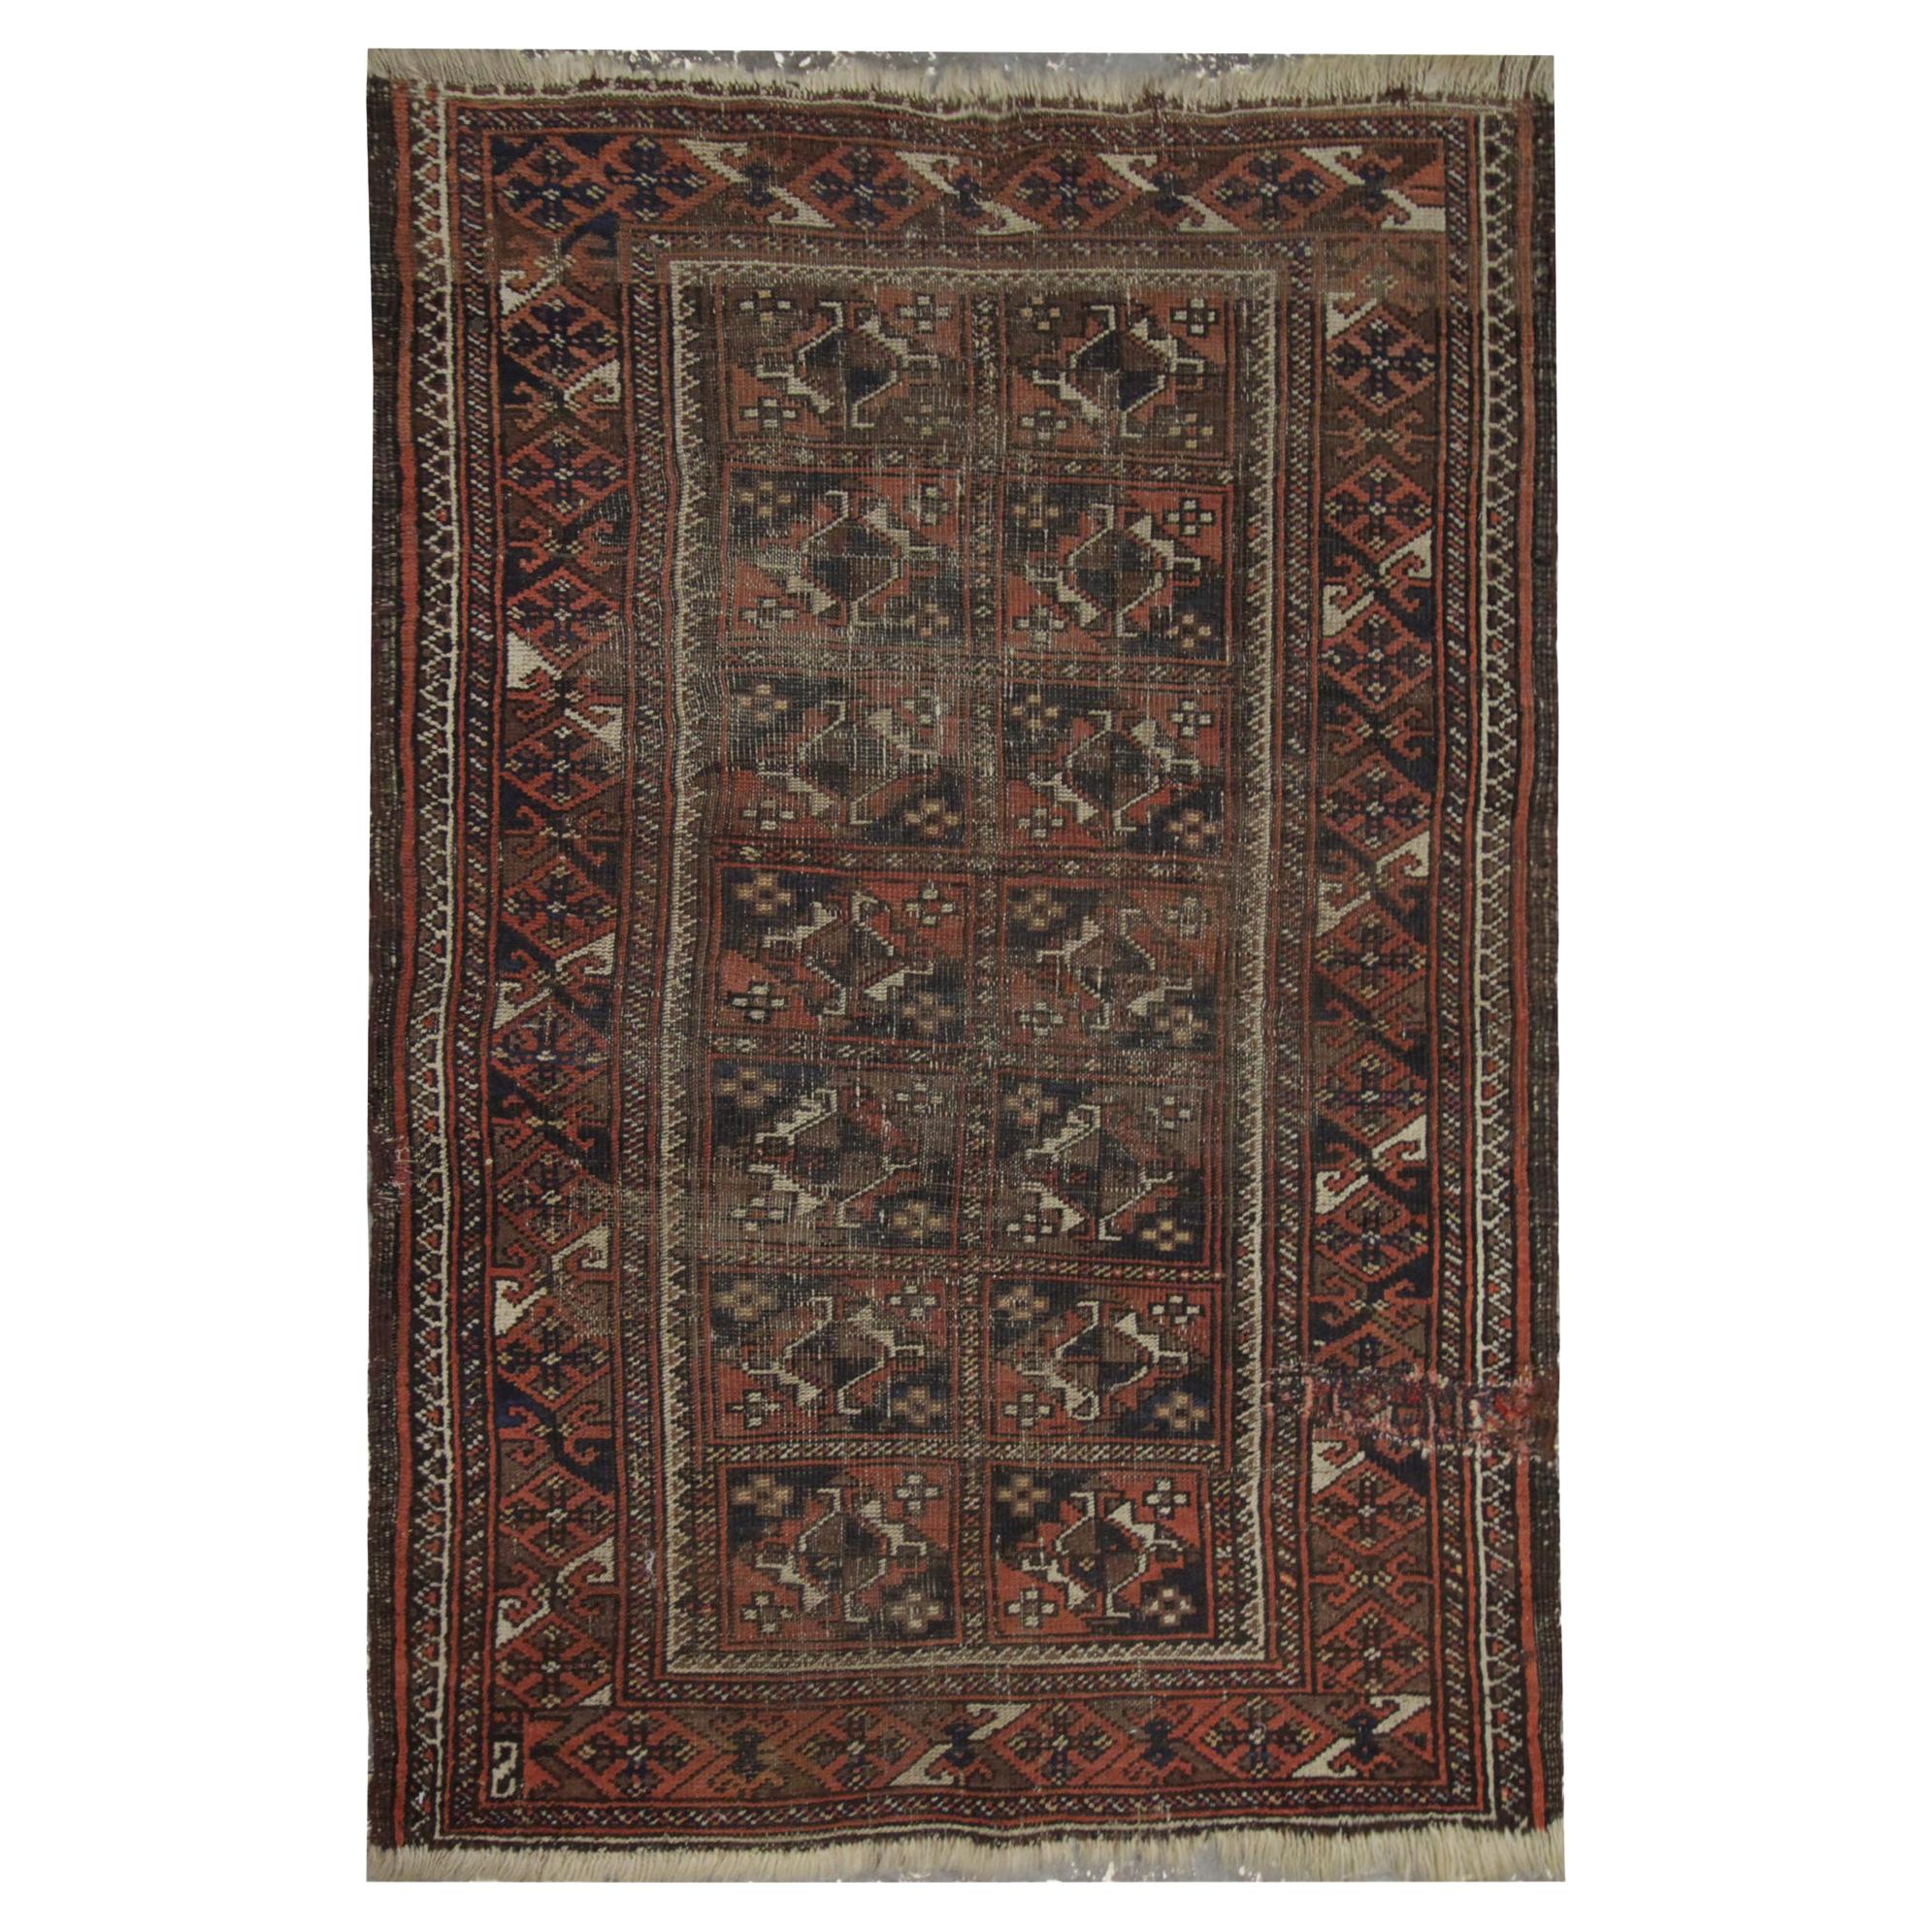 Antique Rugs Handwoven Red Area Wool Oriental Carpet For Sale